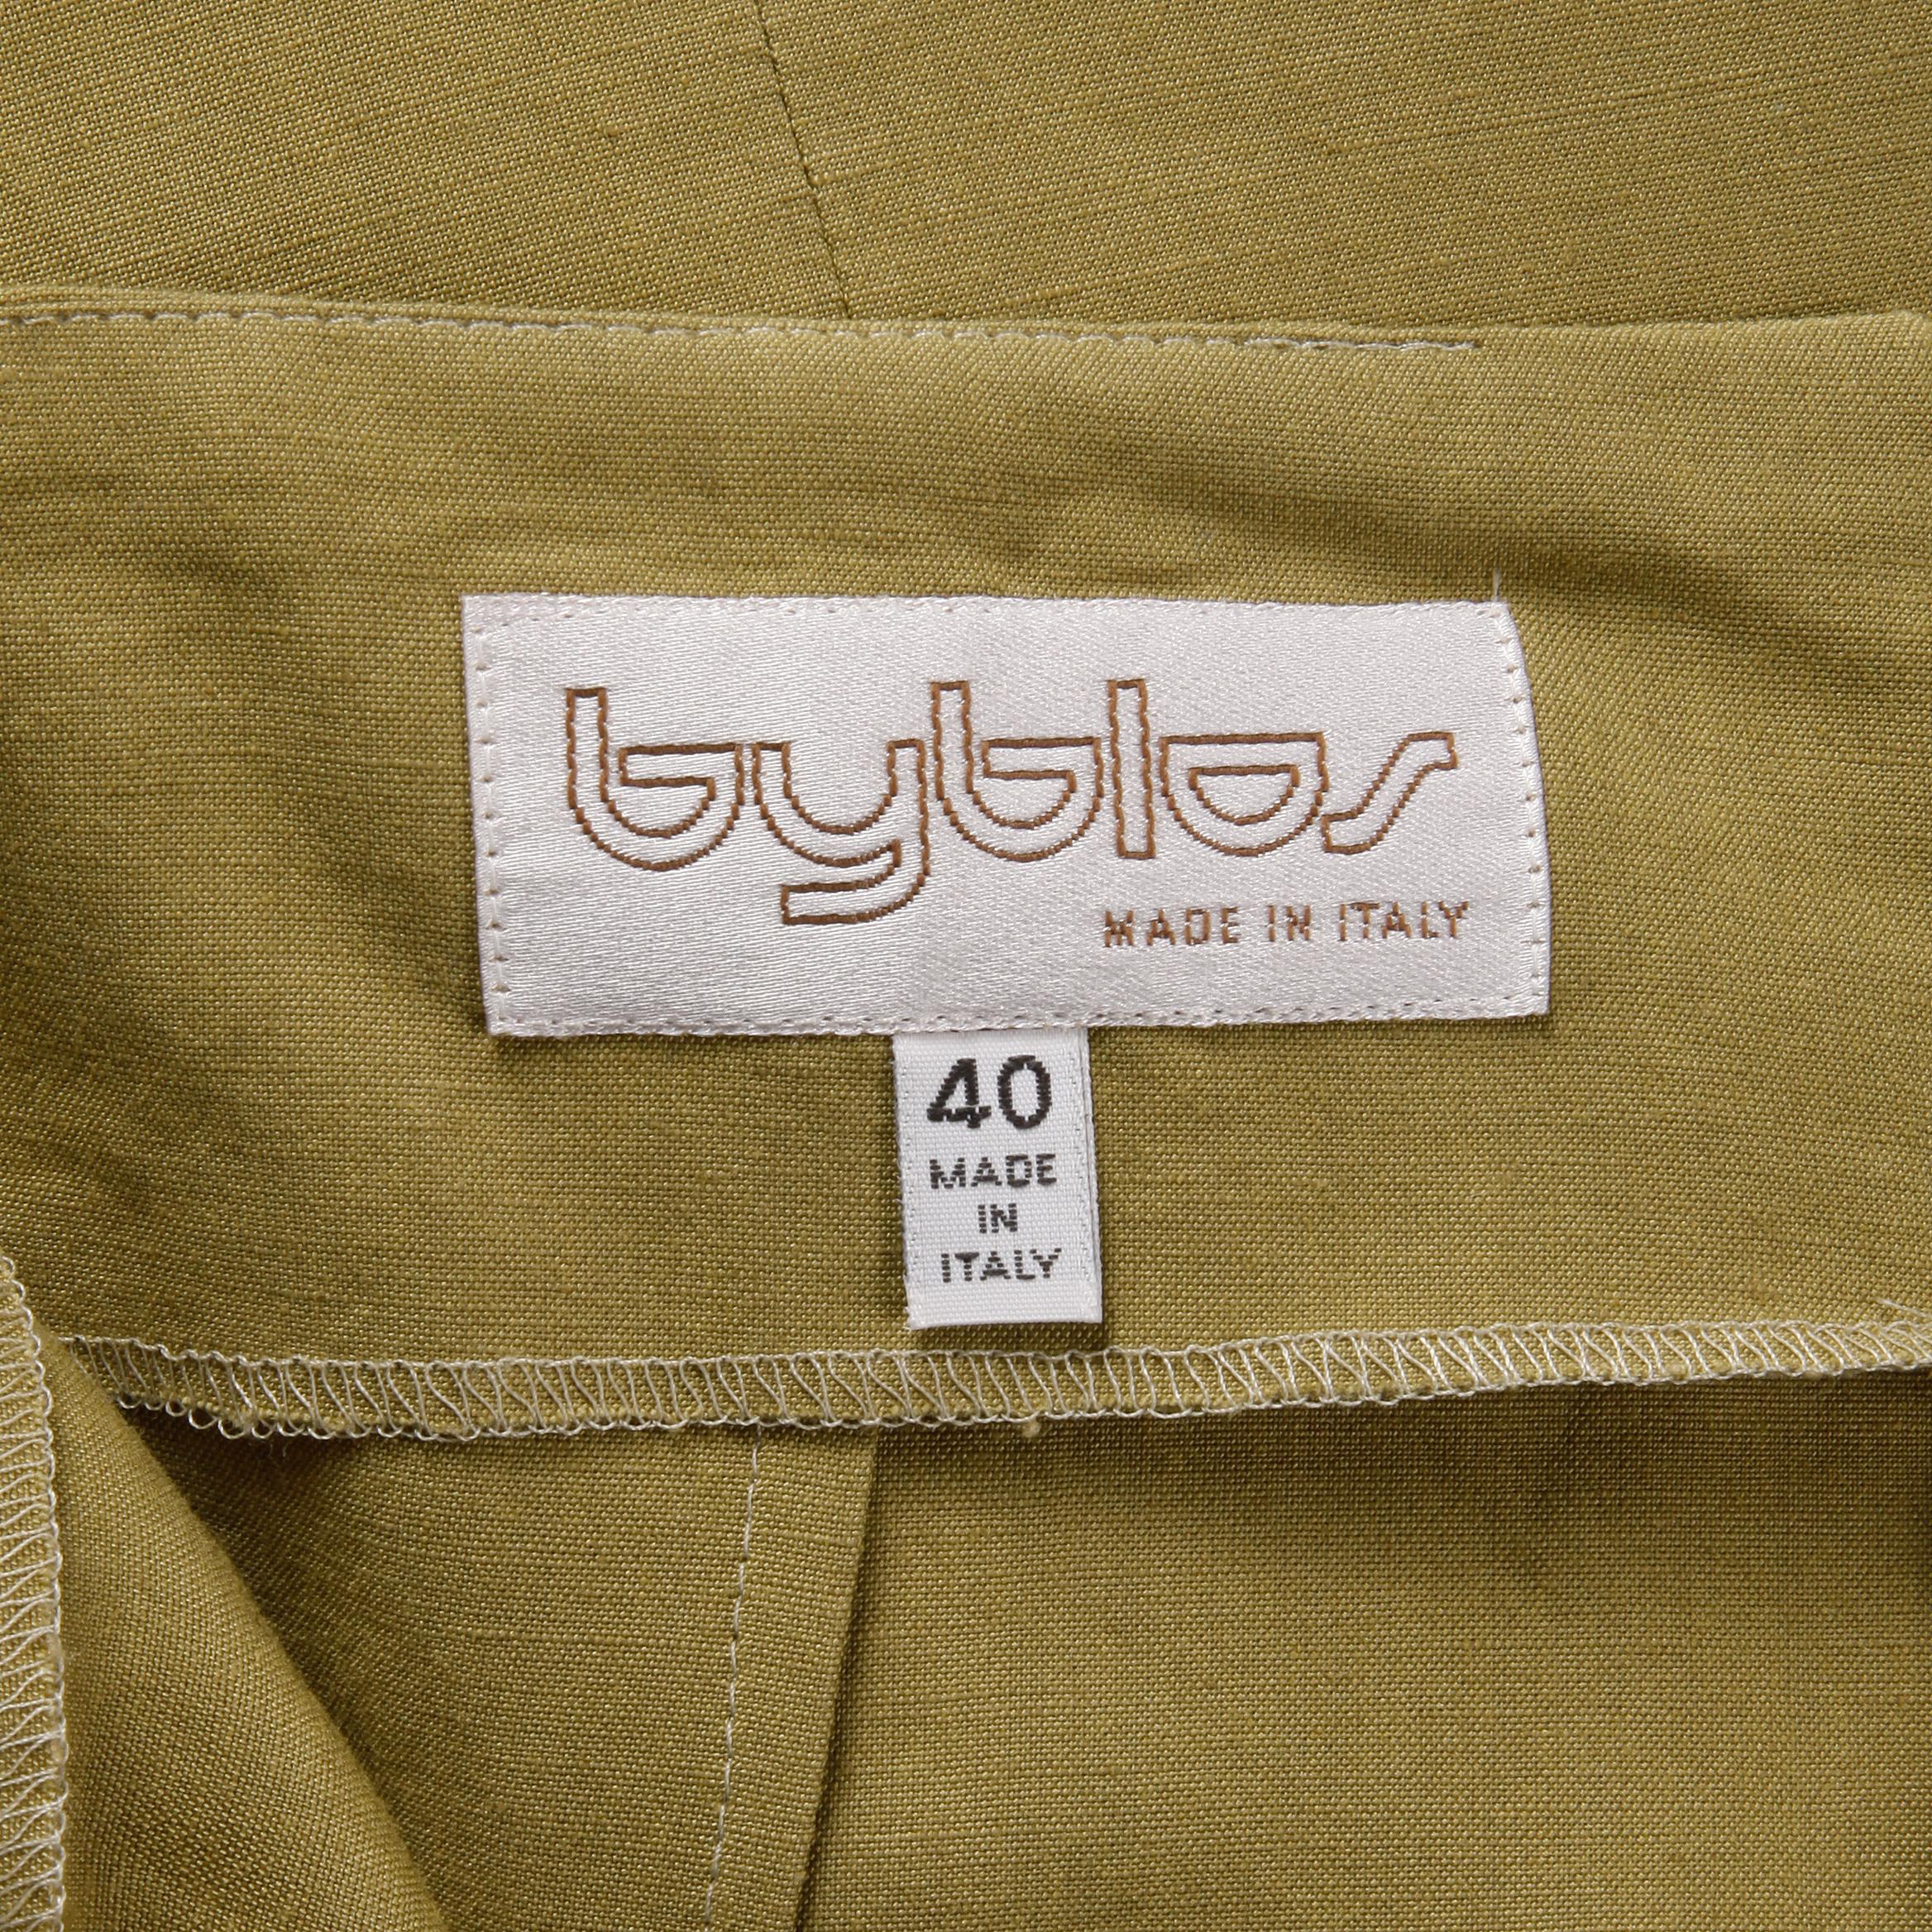 Flattering vintage olive green 1990s asymmetric skirt by Byblos in what feels like a stretch linen fabric. Unlined with rear zip closure. The marked size is 40, and the skirt fits like a modern size small. The waist measures 26